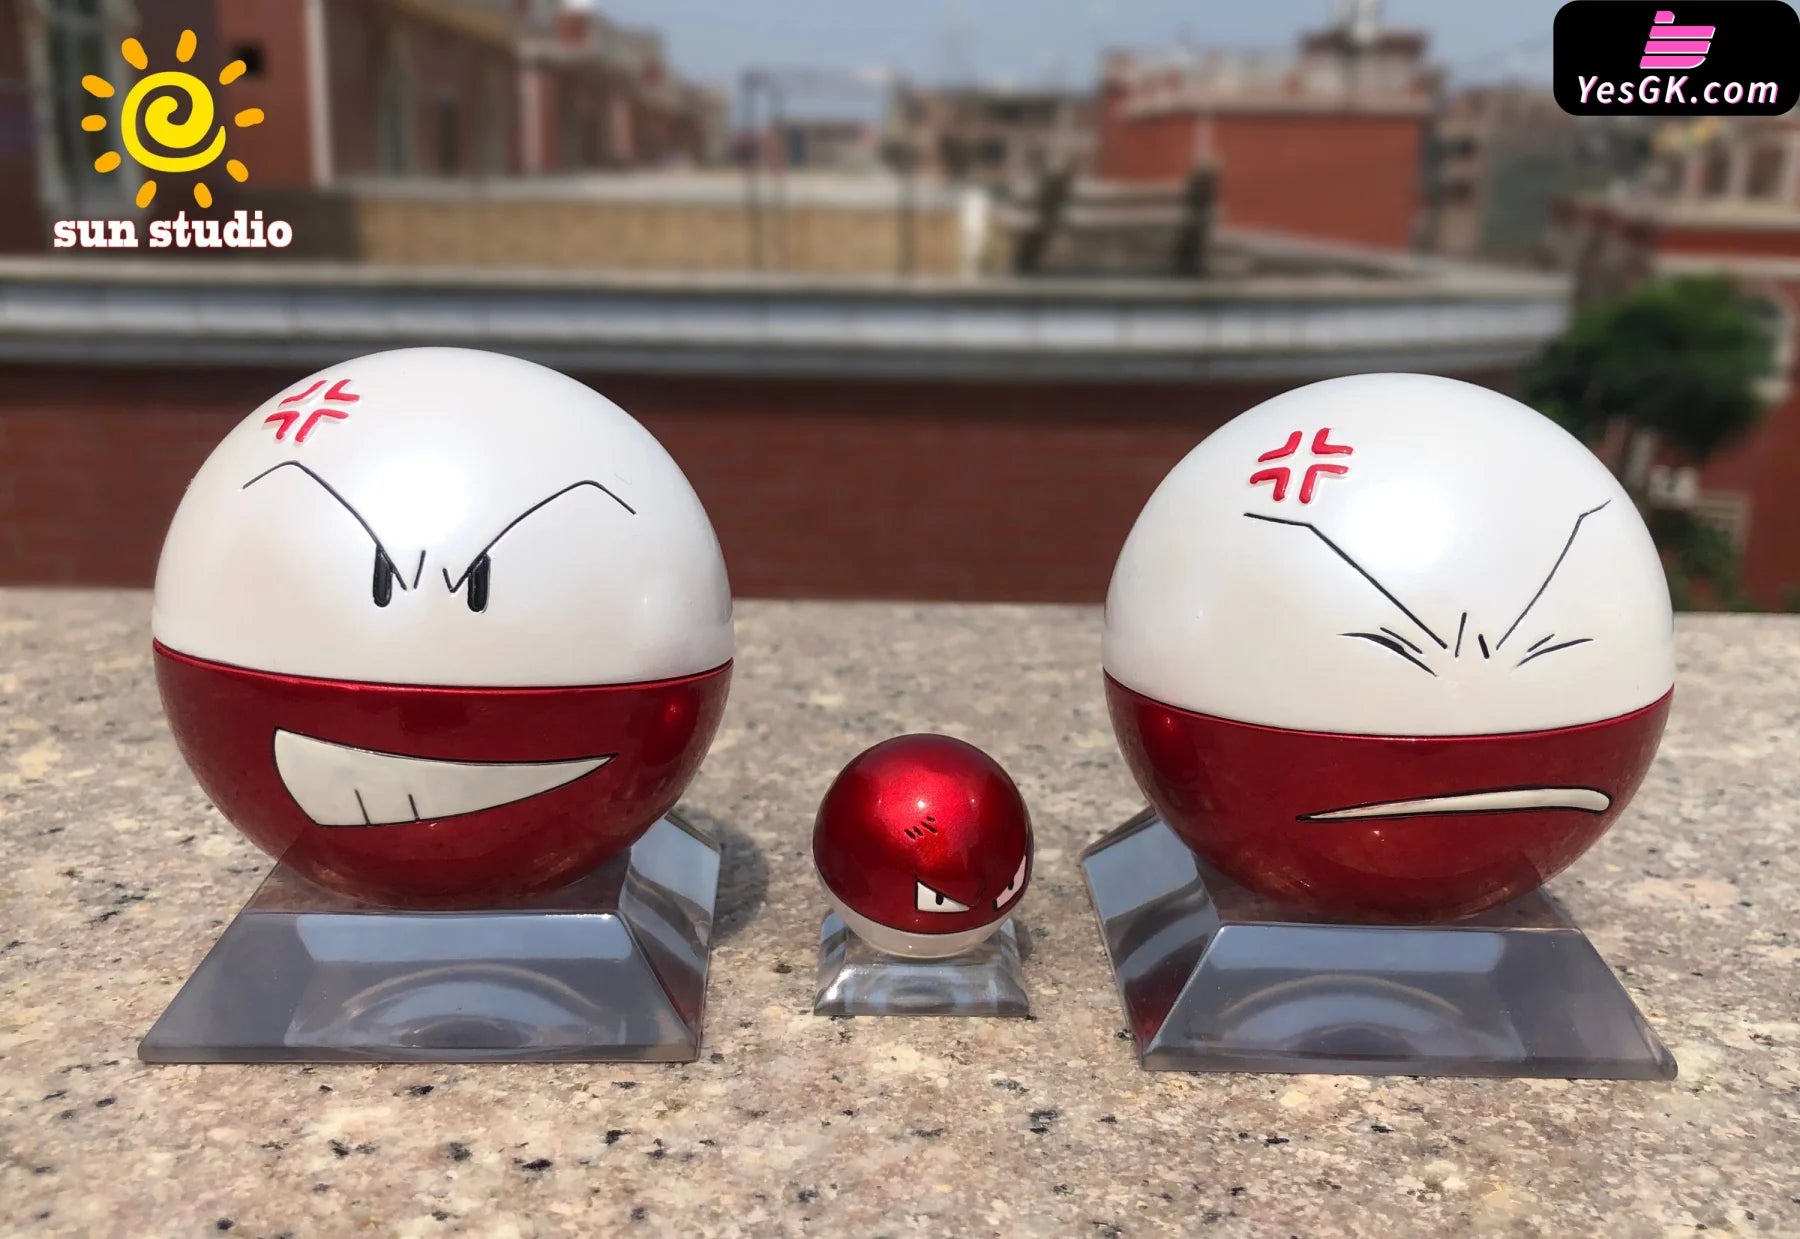 Pokemon Secrets of the Ages: Voltorb and Electrode by Boonzeet on